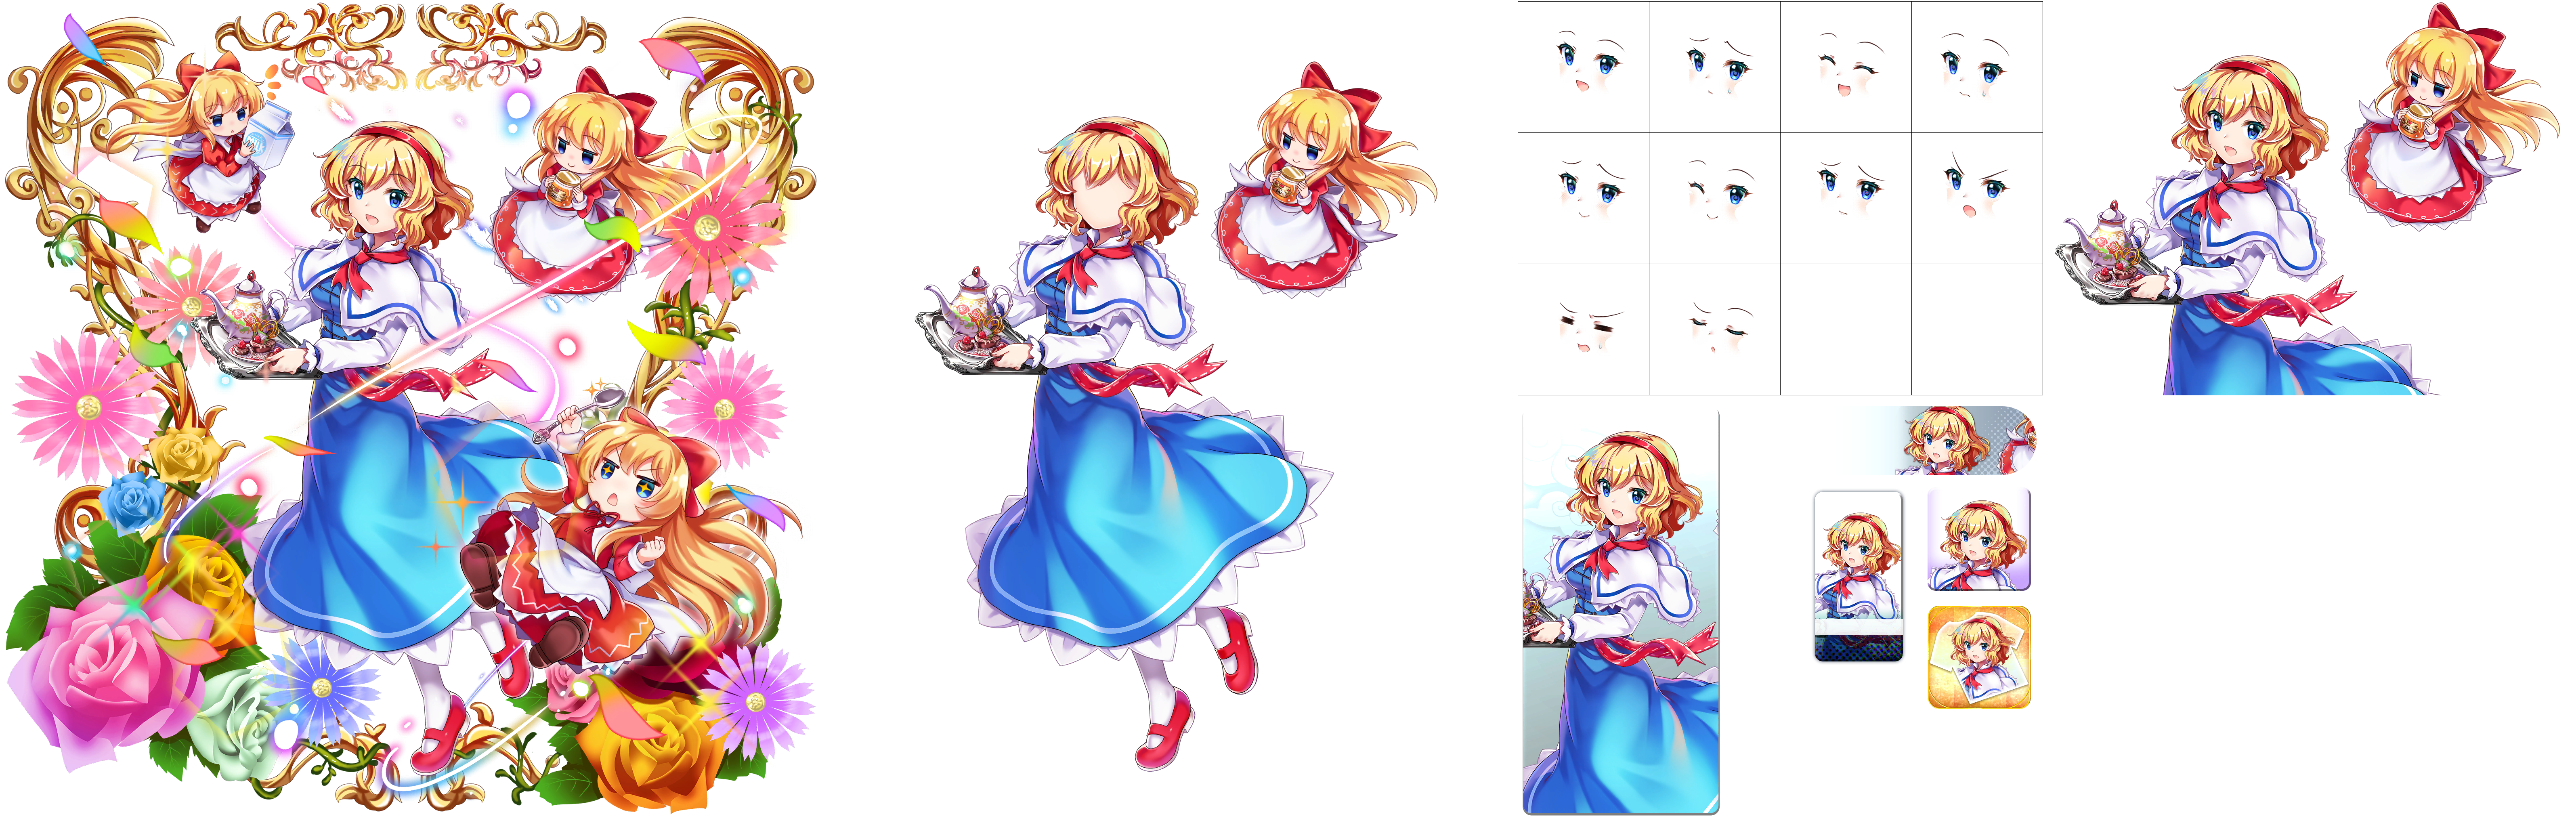 Touhou LostWord - Alice Margatroid (Seven-Colored Puppet Master)